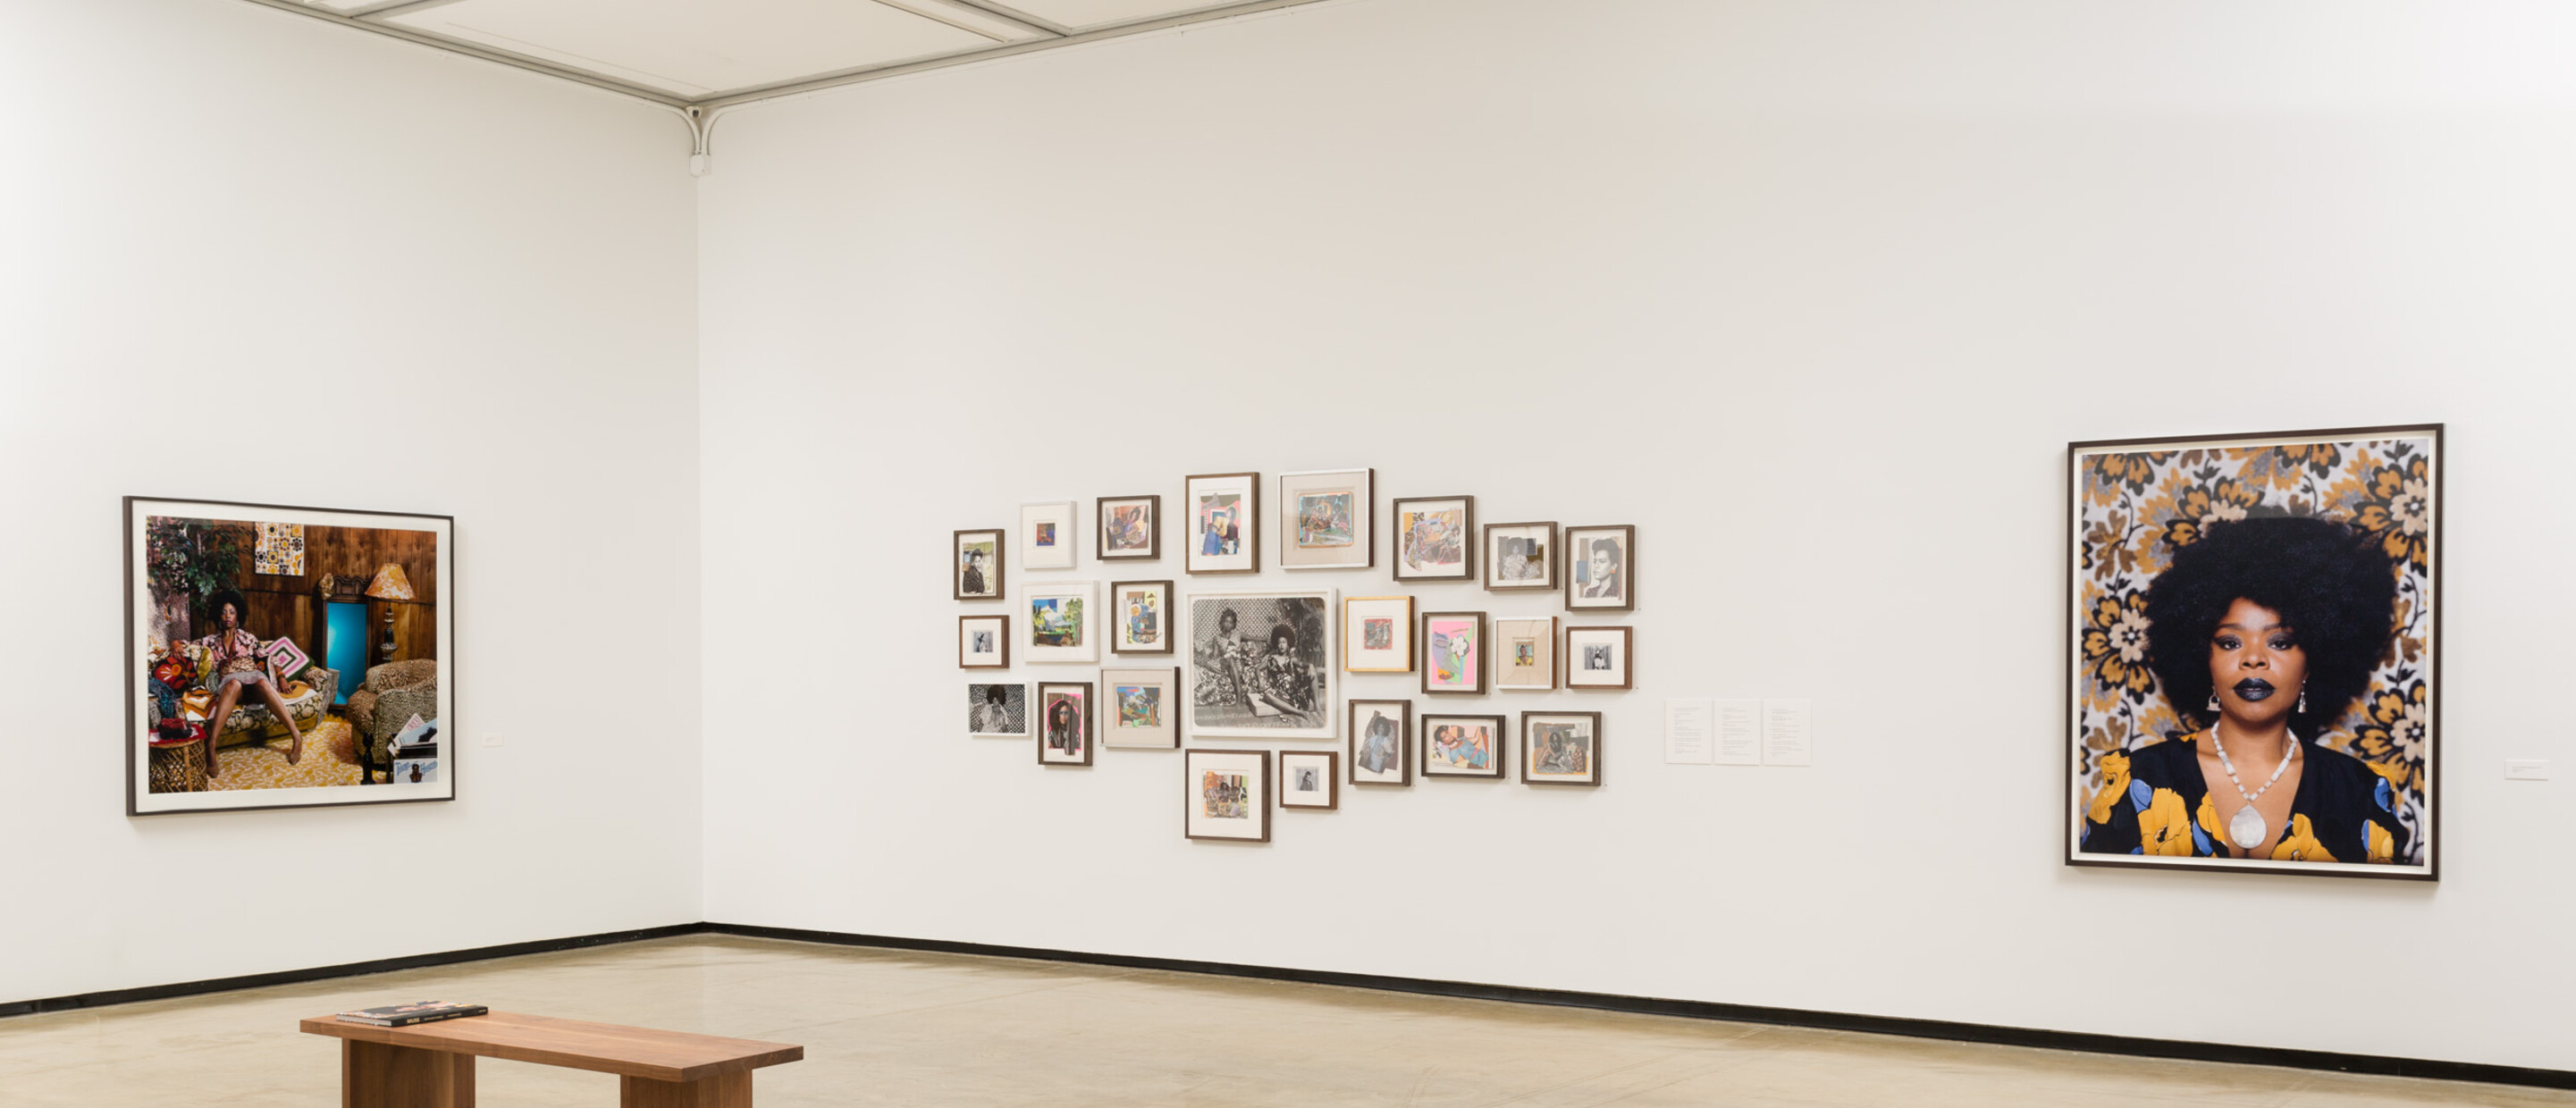 Installation view of a gallery with photographs and montage of 2-dimensional works with 2 wooden benches on the floor